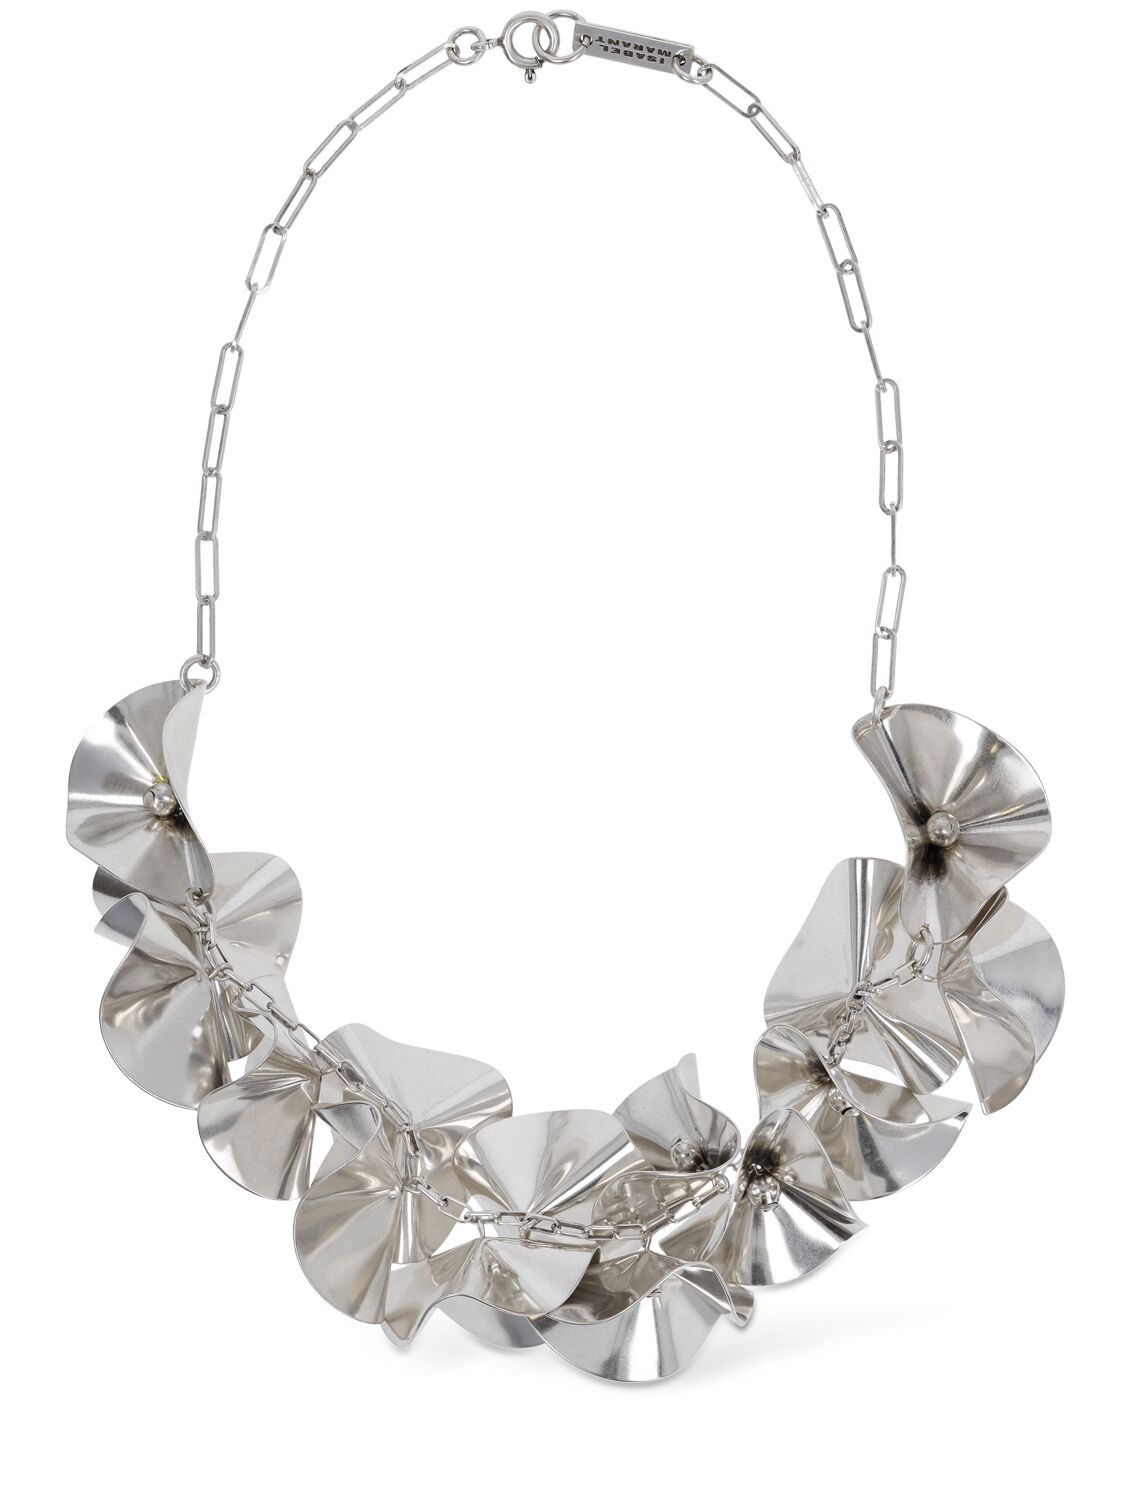 Image of Flower Power Collar Necklace